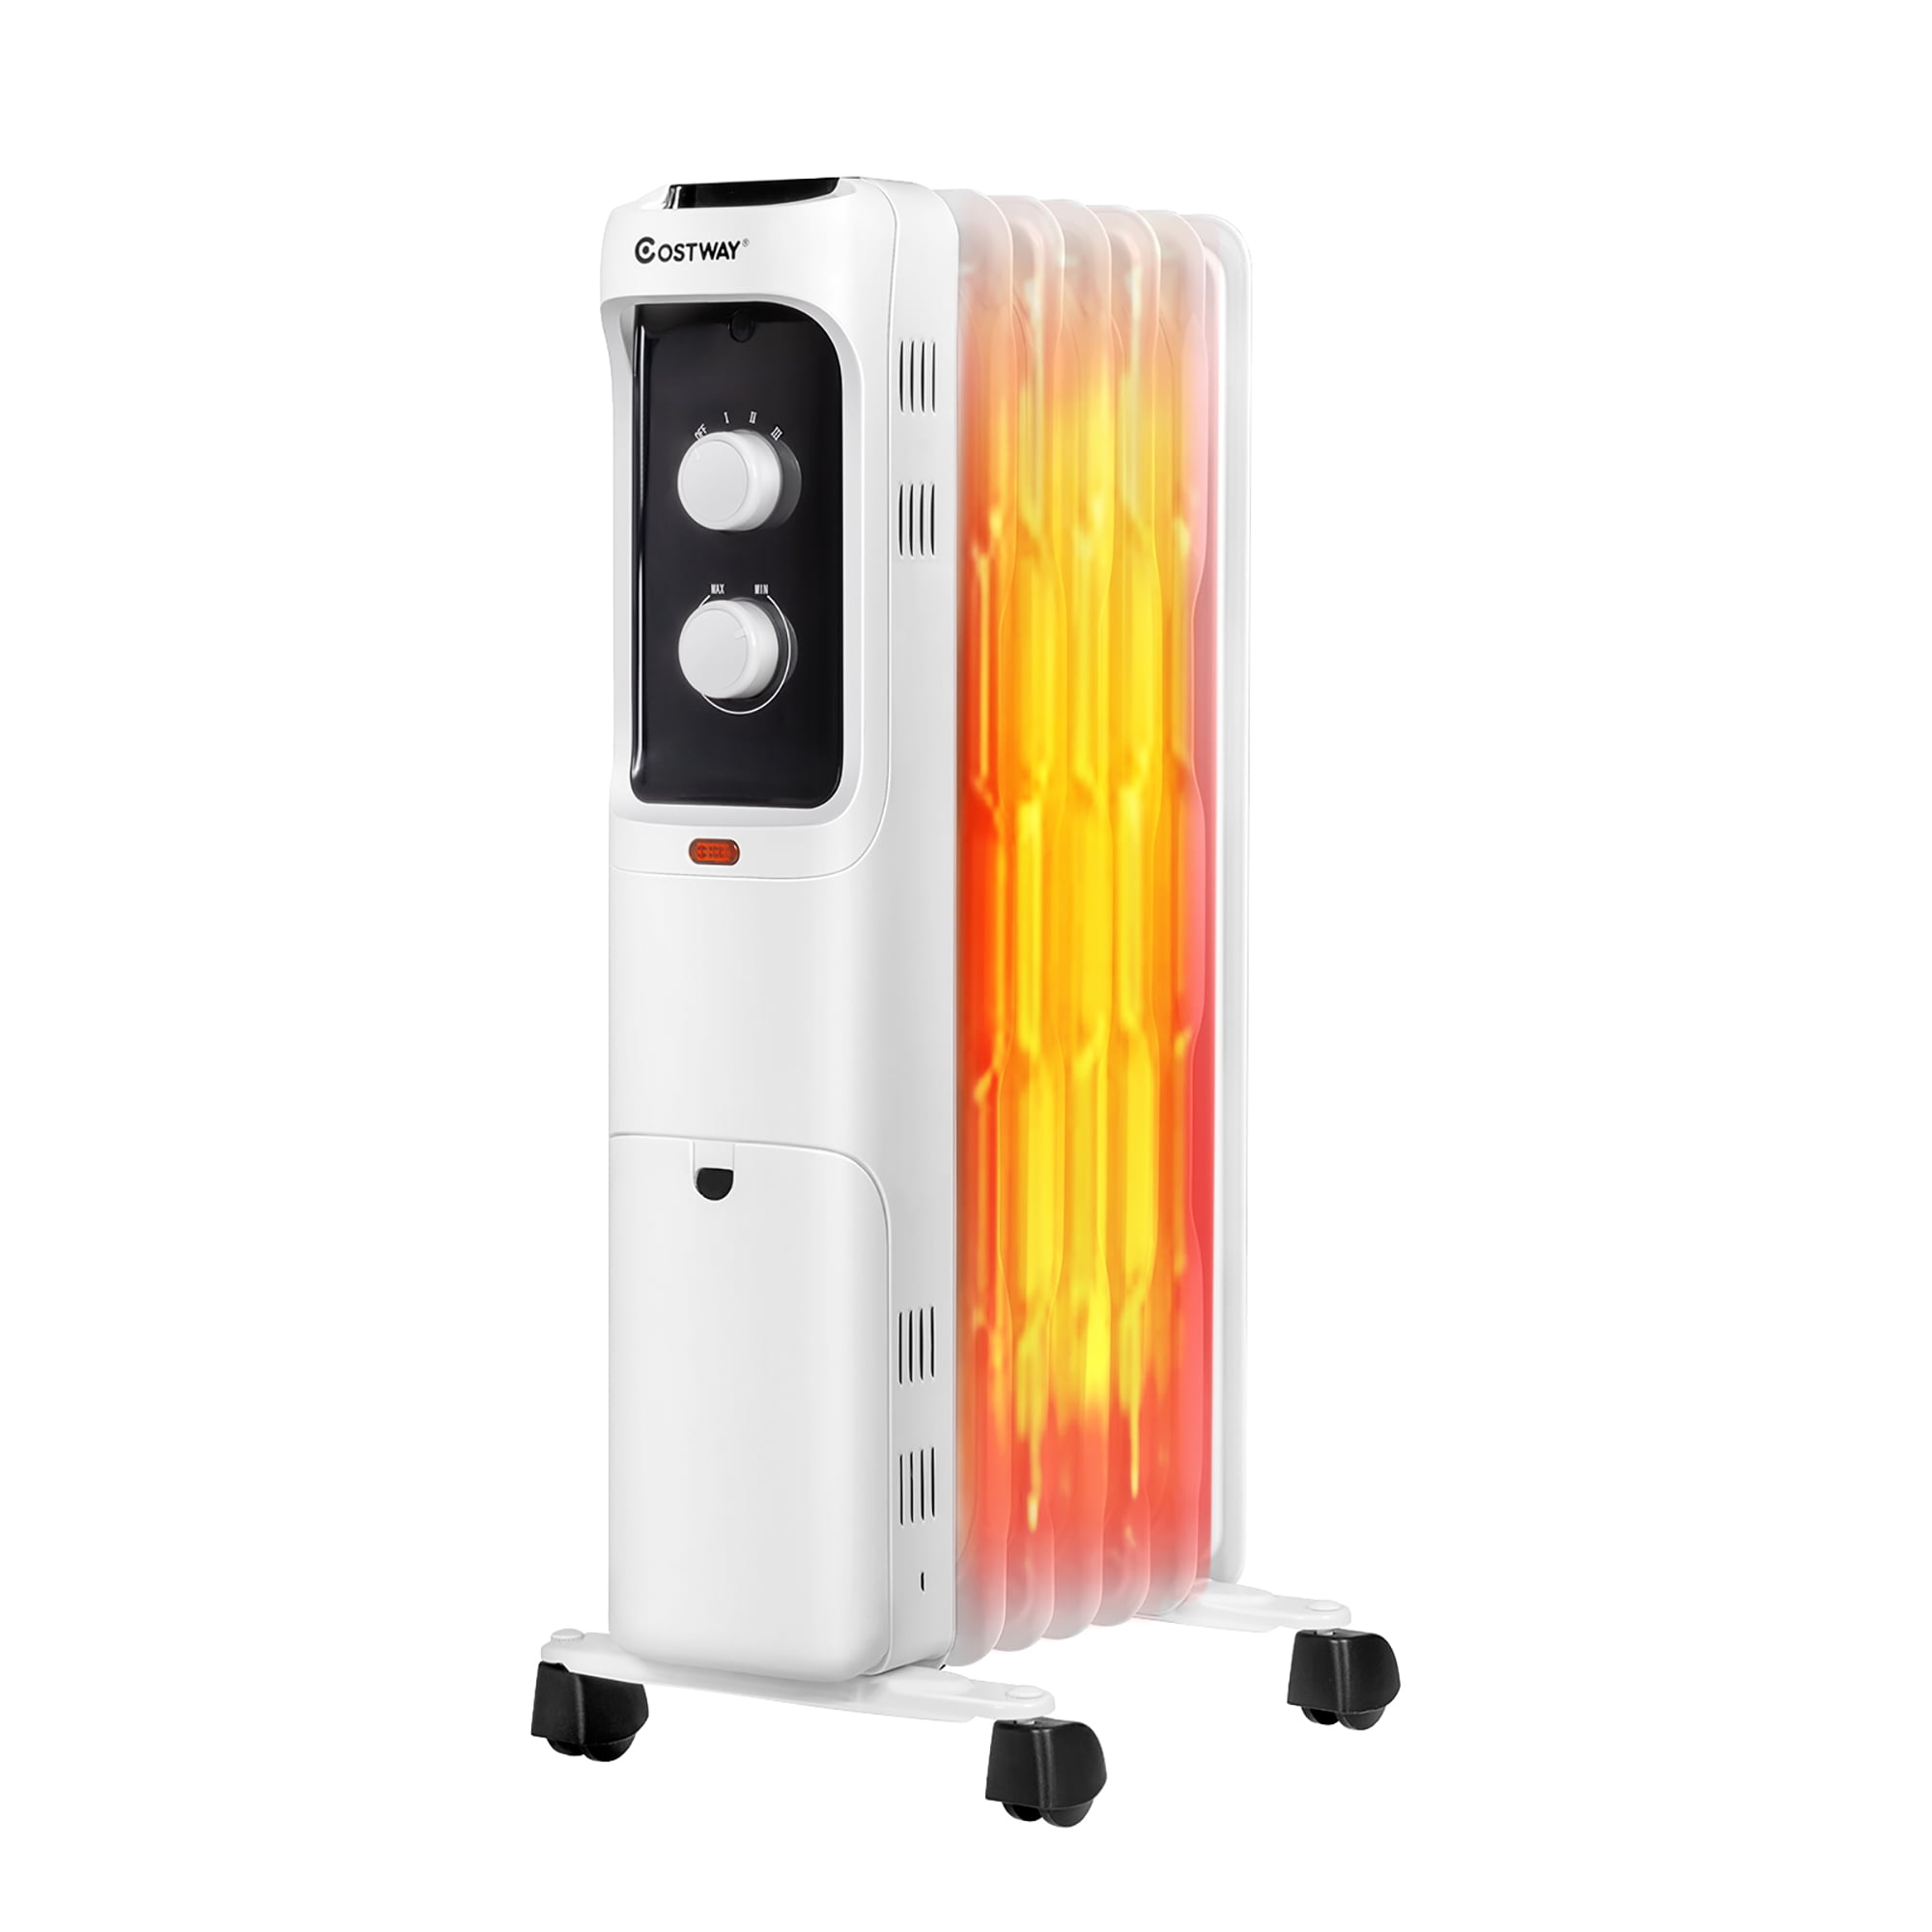 Costway 1500W Oil Filled Heater Portable Radiator Space Heater w/  Adjustable Thermostat White 